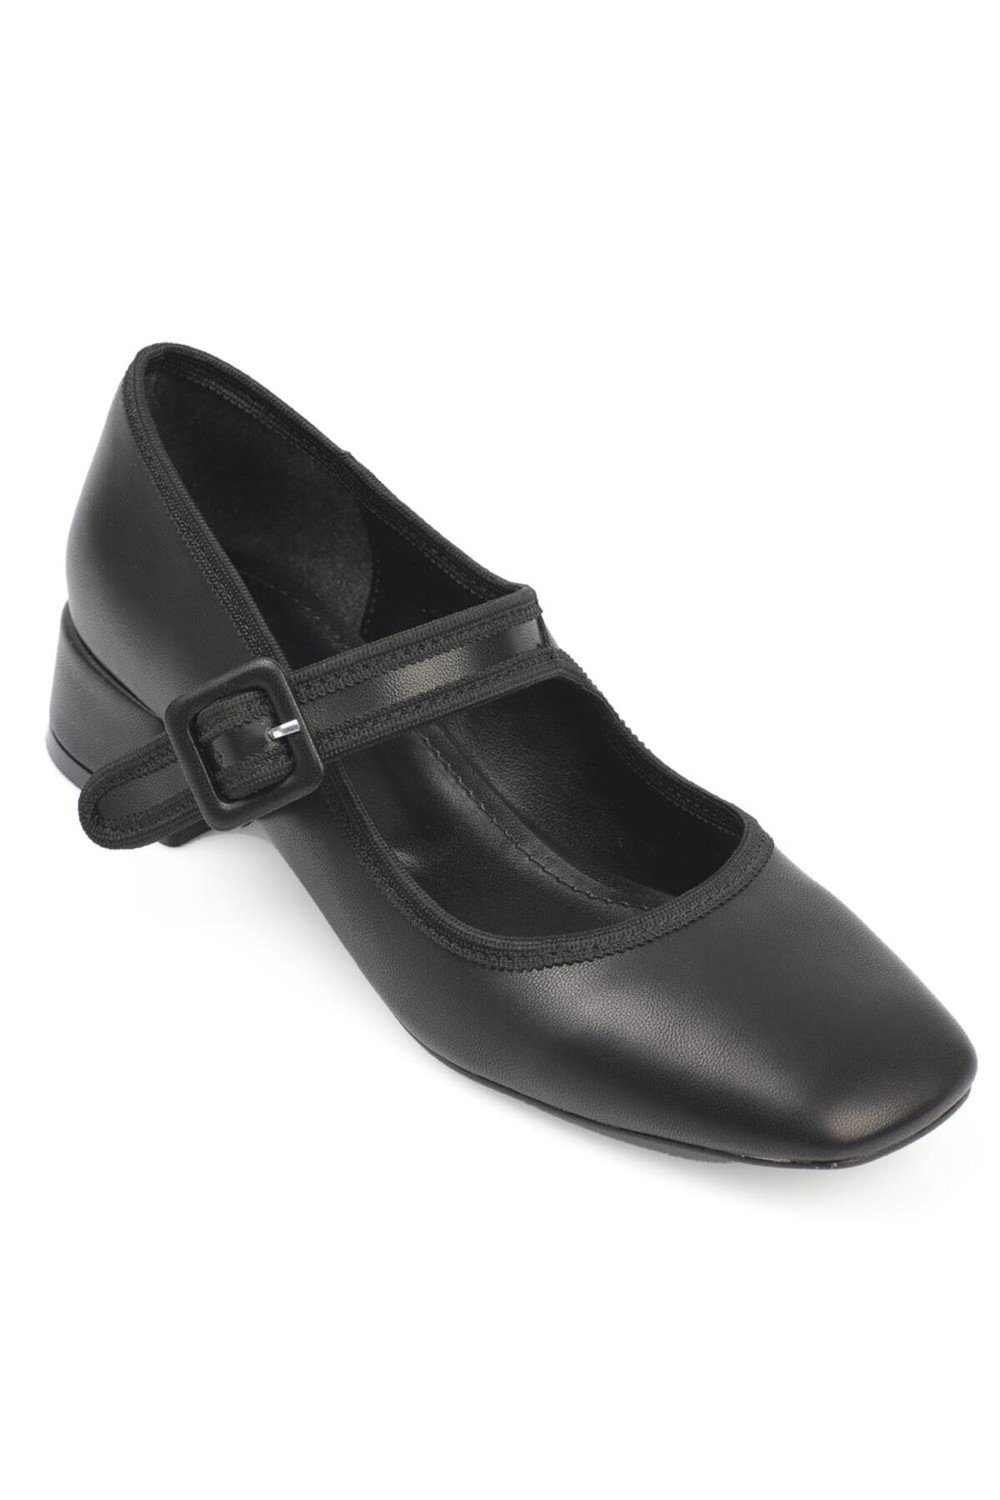 Capone Outfitters Capone Flat Toe Women's Shoes with Tape and Buckle Low Heel